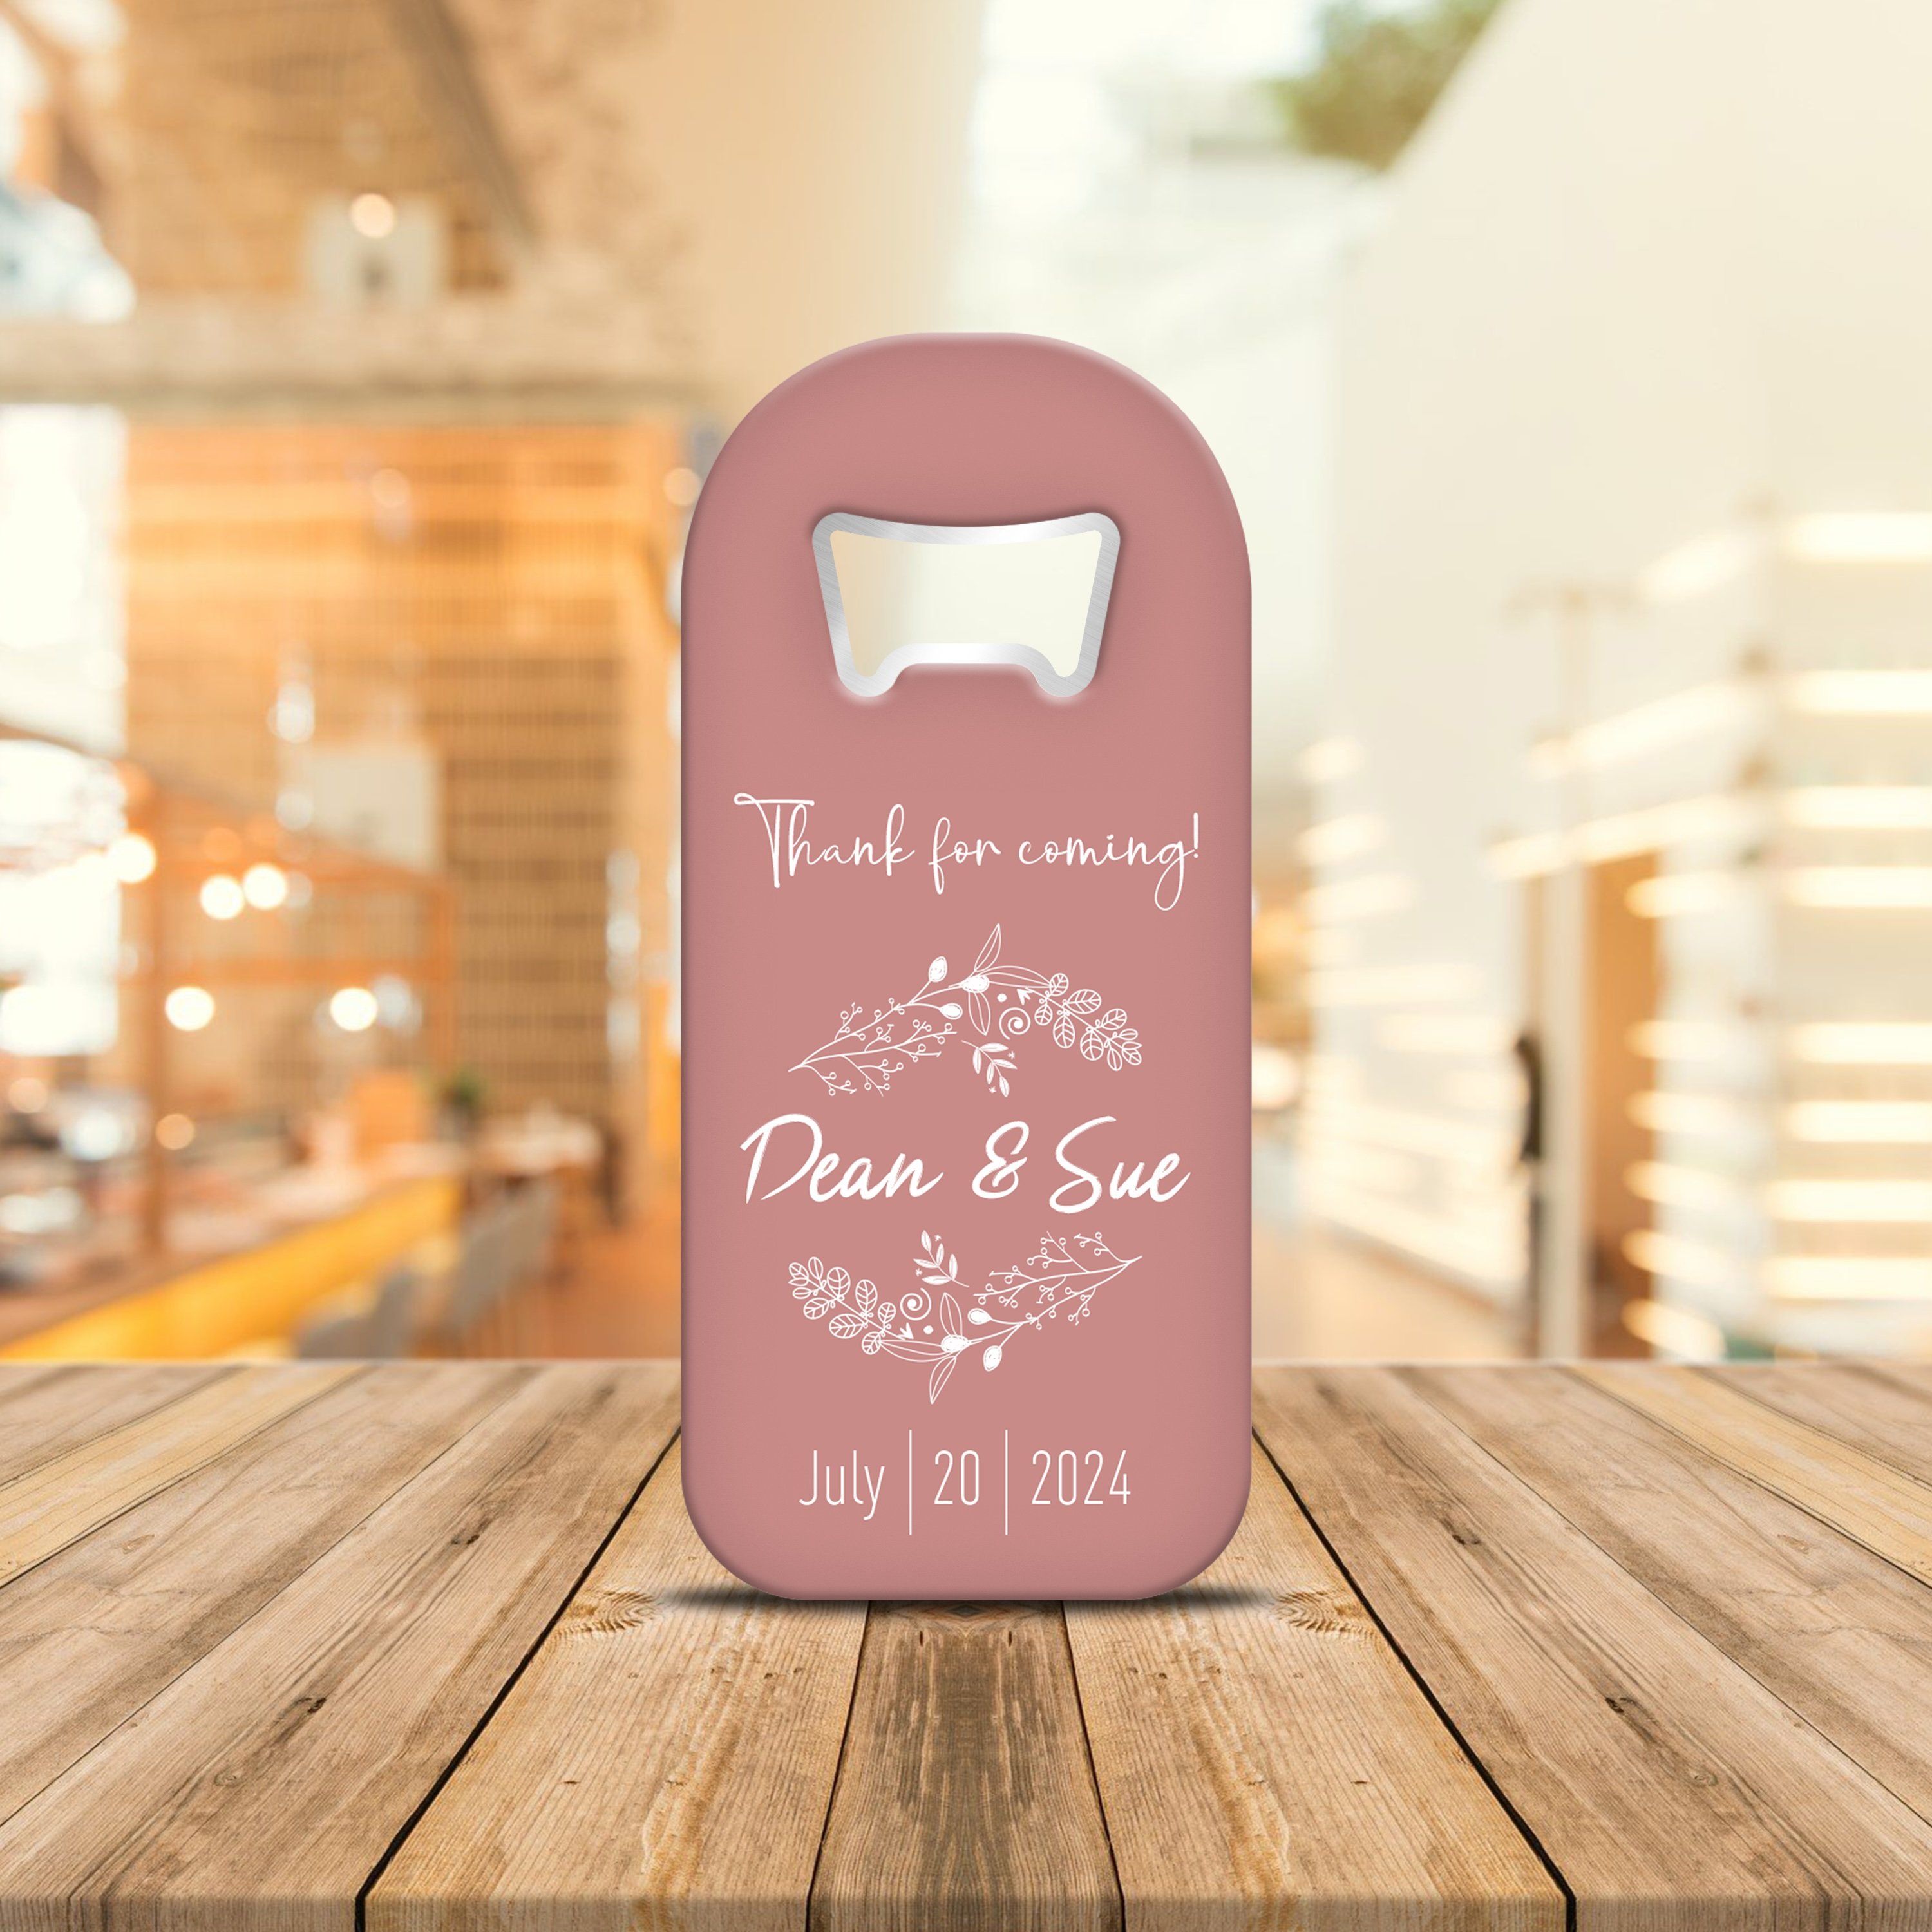 Bulk Wedding Favors, Personalized Gifts, Thank You Gifts, Save The Date, Custom Cap Opener. Make your day special with these unique tokens!